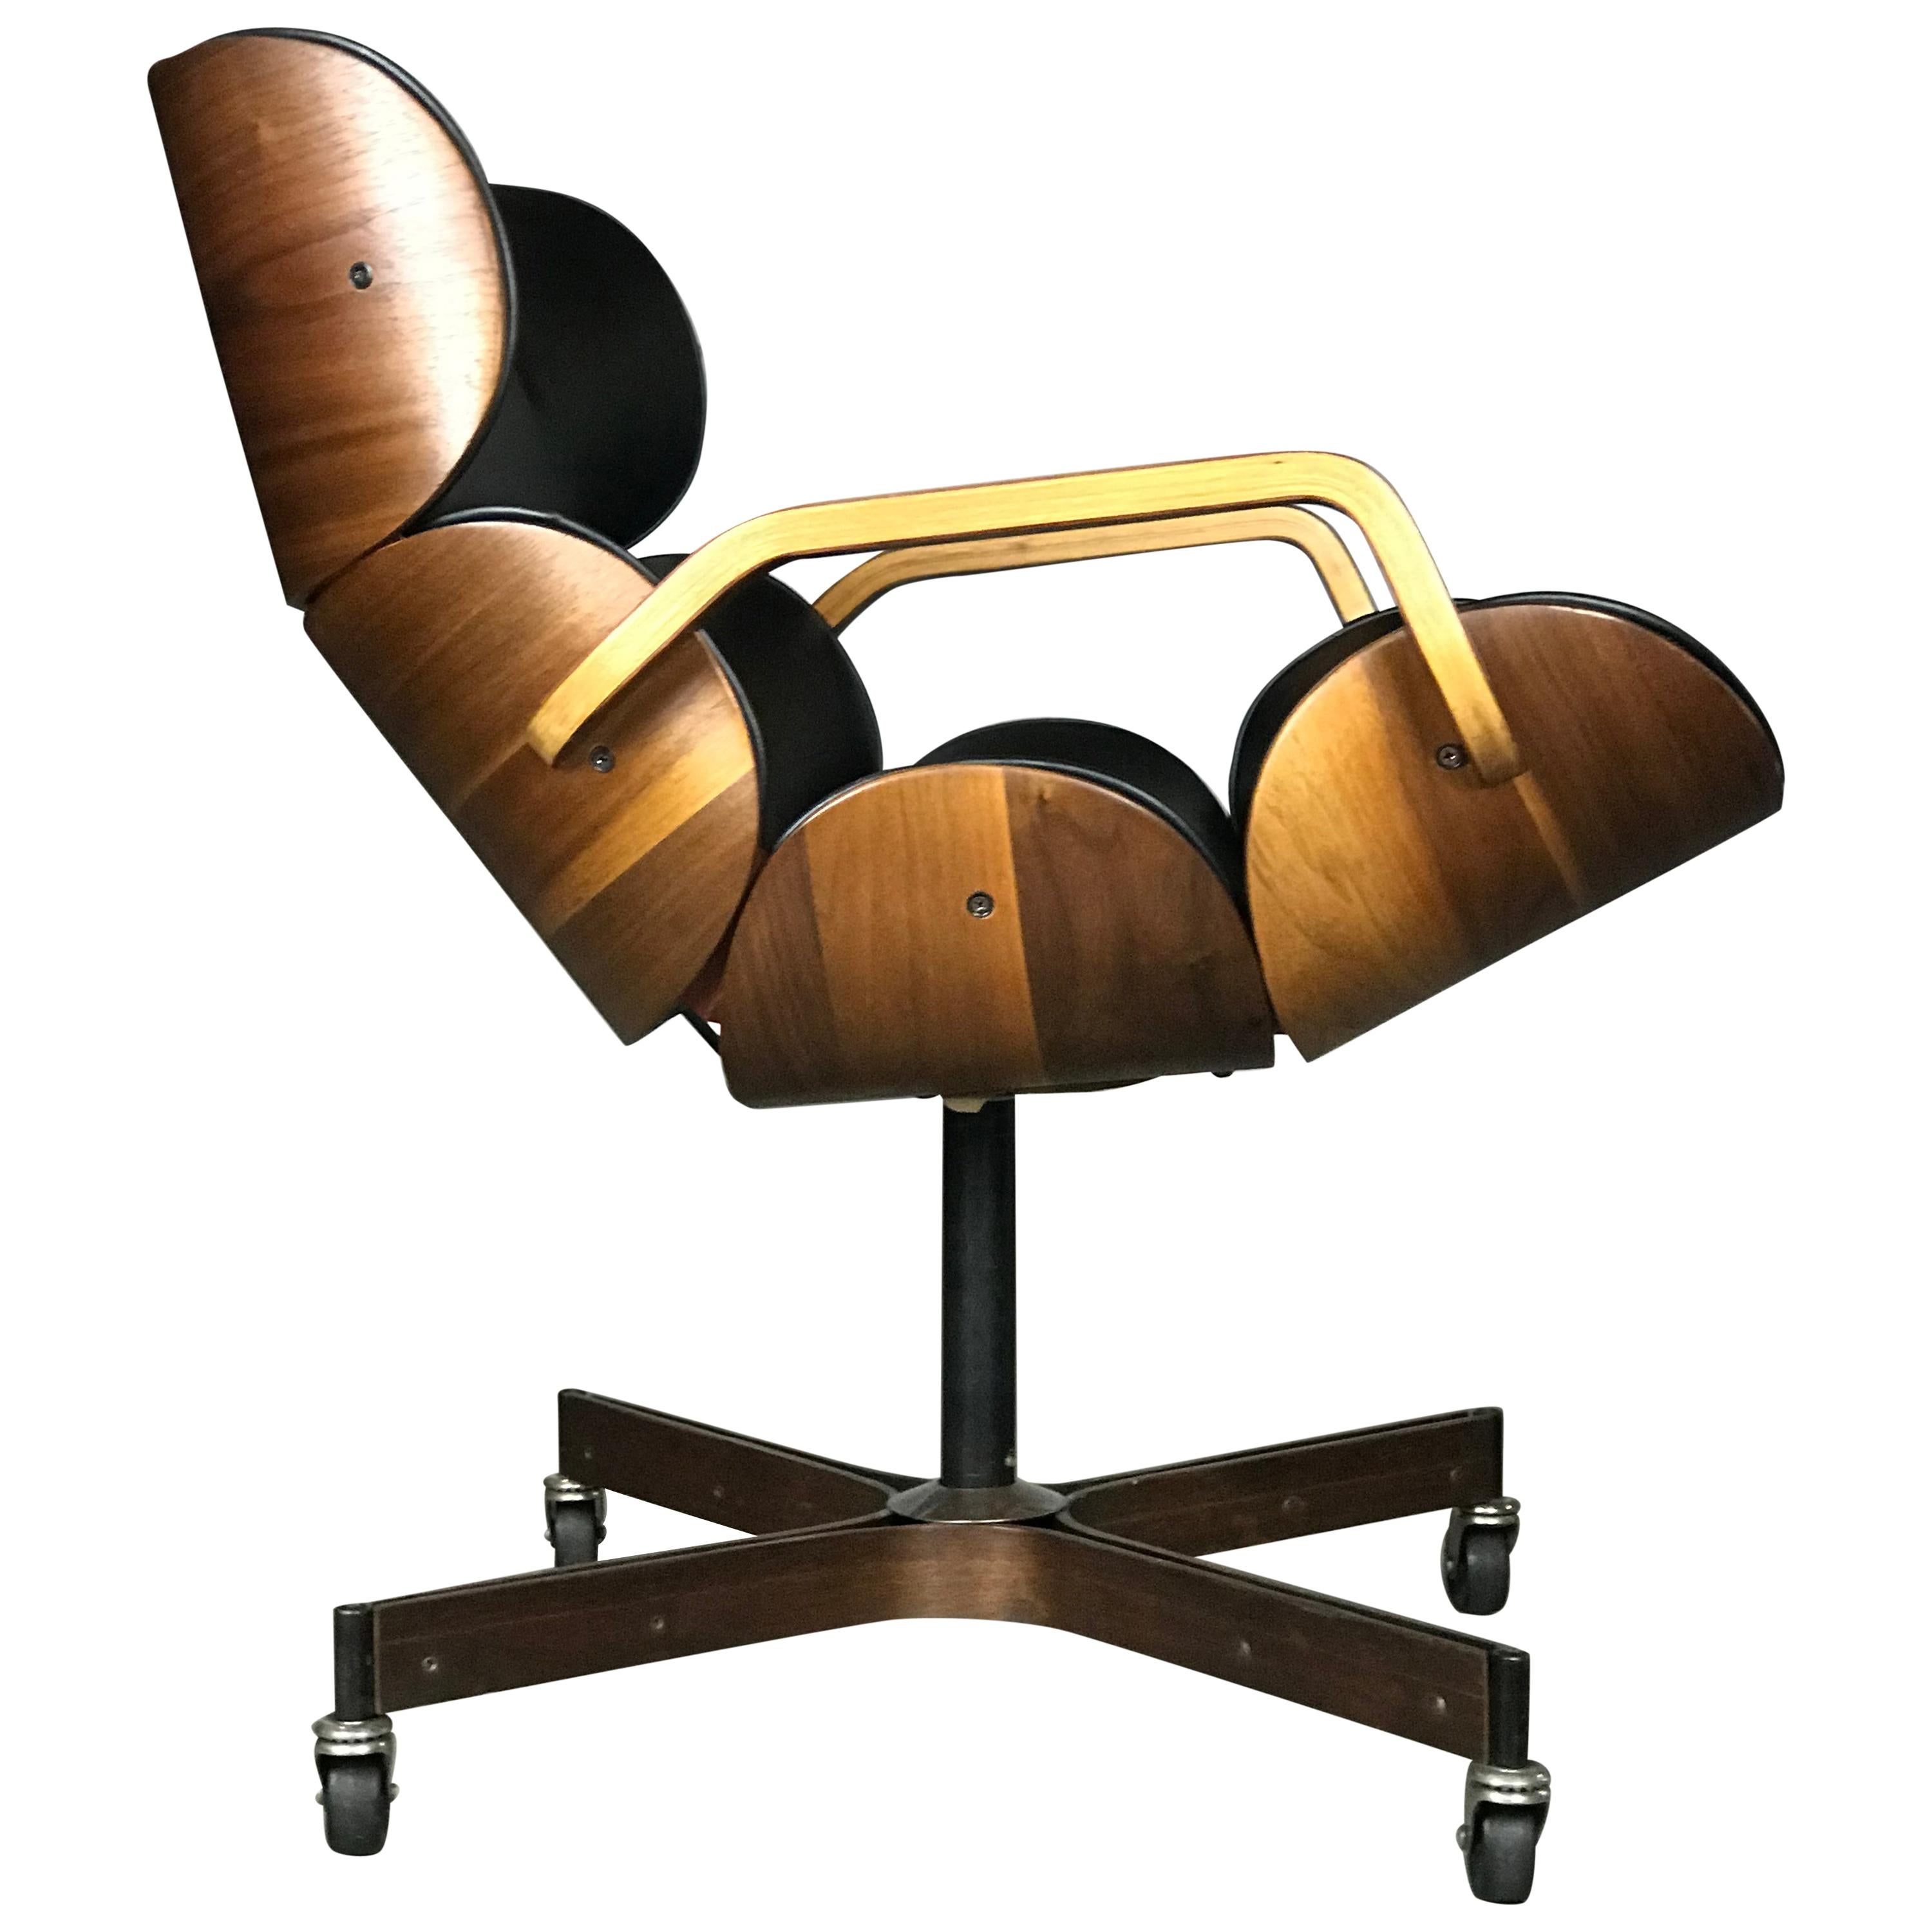 Rolling Segmented Lounge or Desk Chair by George Mulhauser for Plycraft